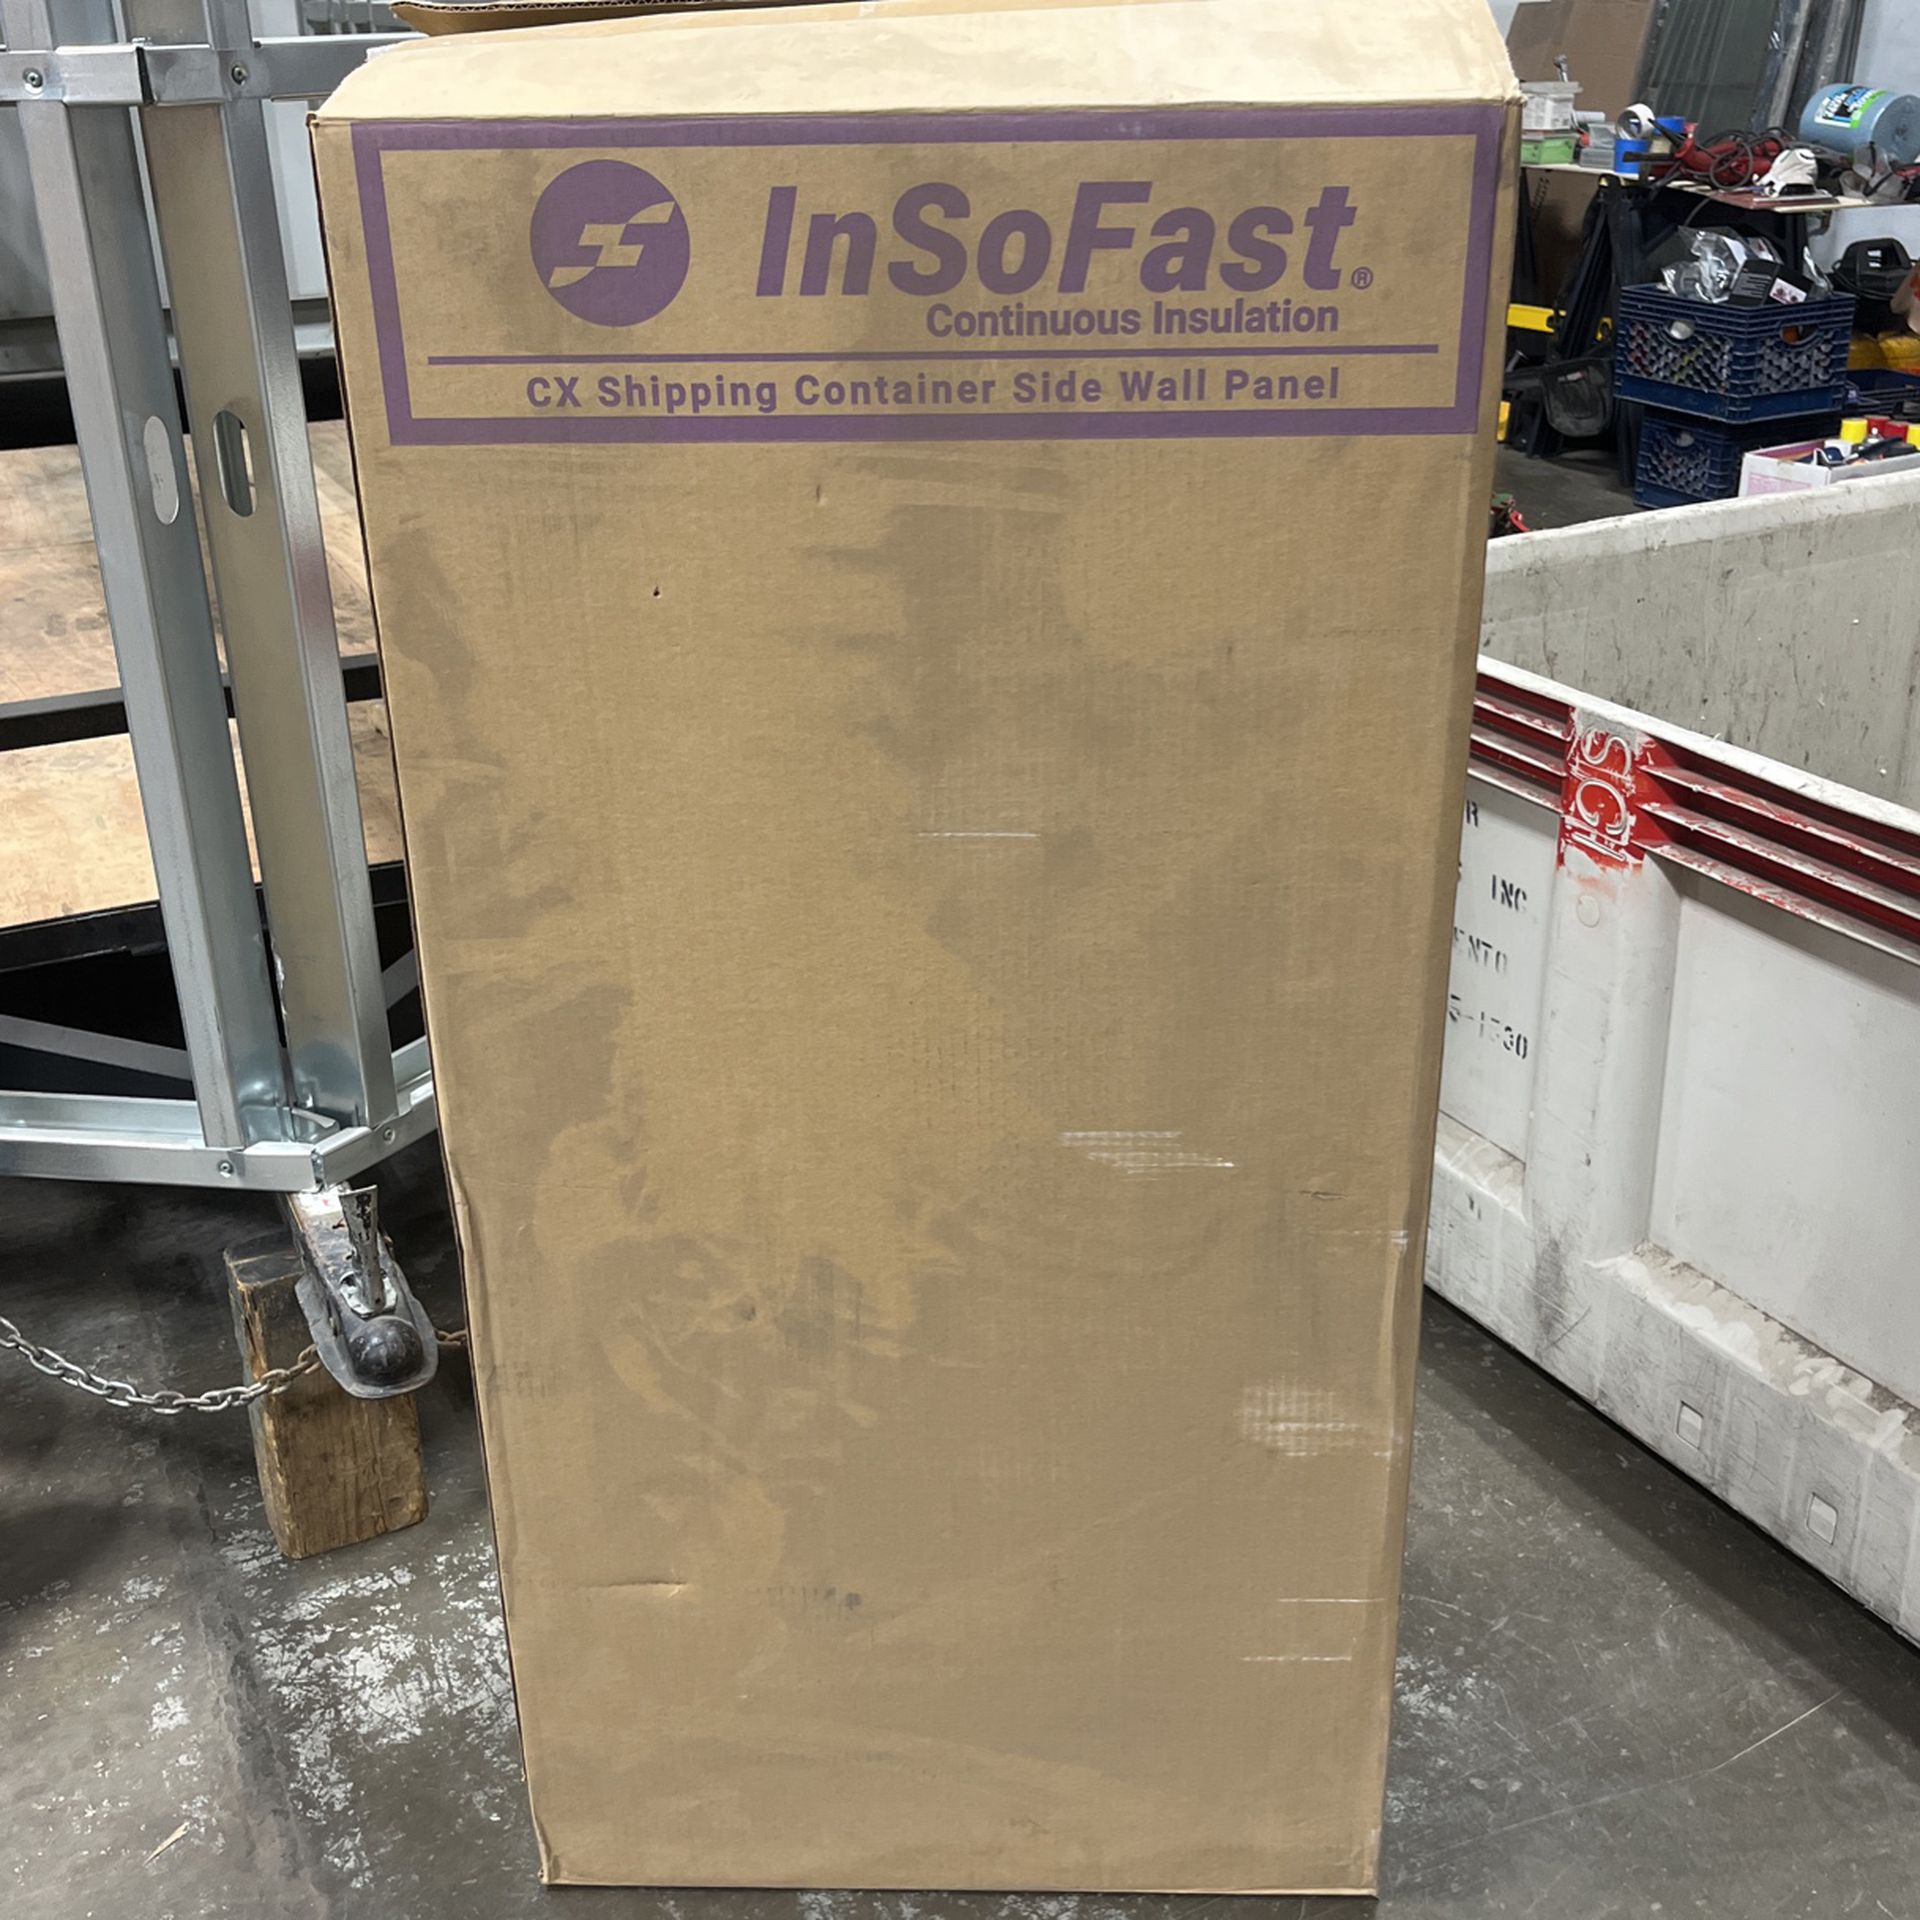 New Open Box InSoFast CX Shipping Container Wall Insulation